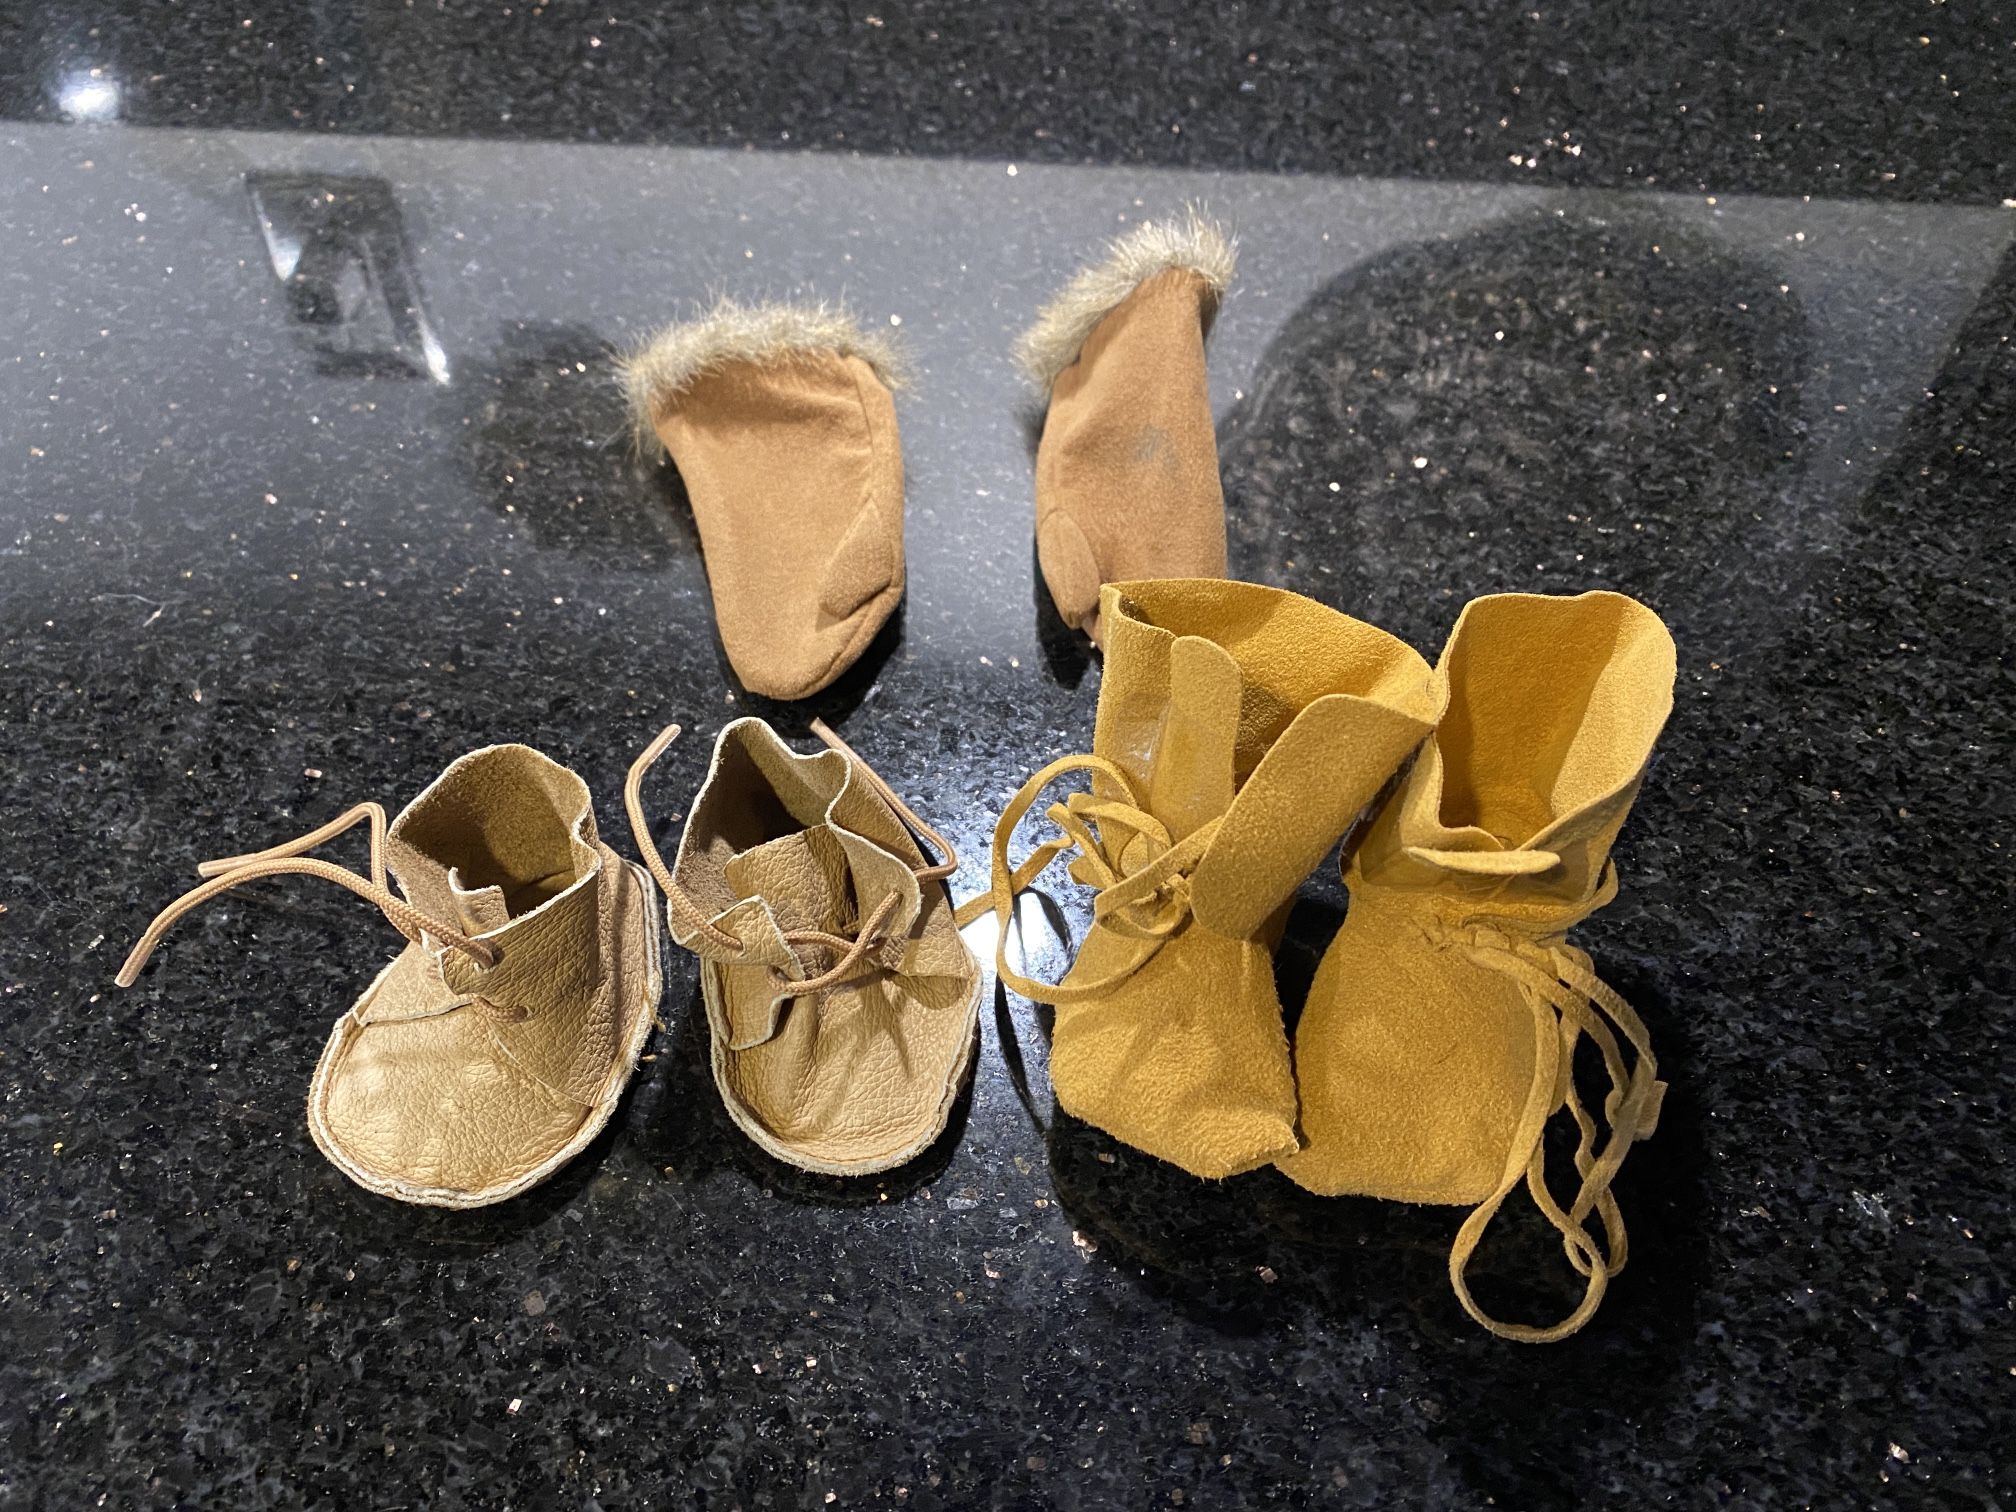 2-pairs Doll Shoes/Boots & a Pair of Gloves for 18” Porcelain Dolls Shoe Size 2”